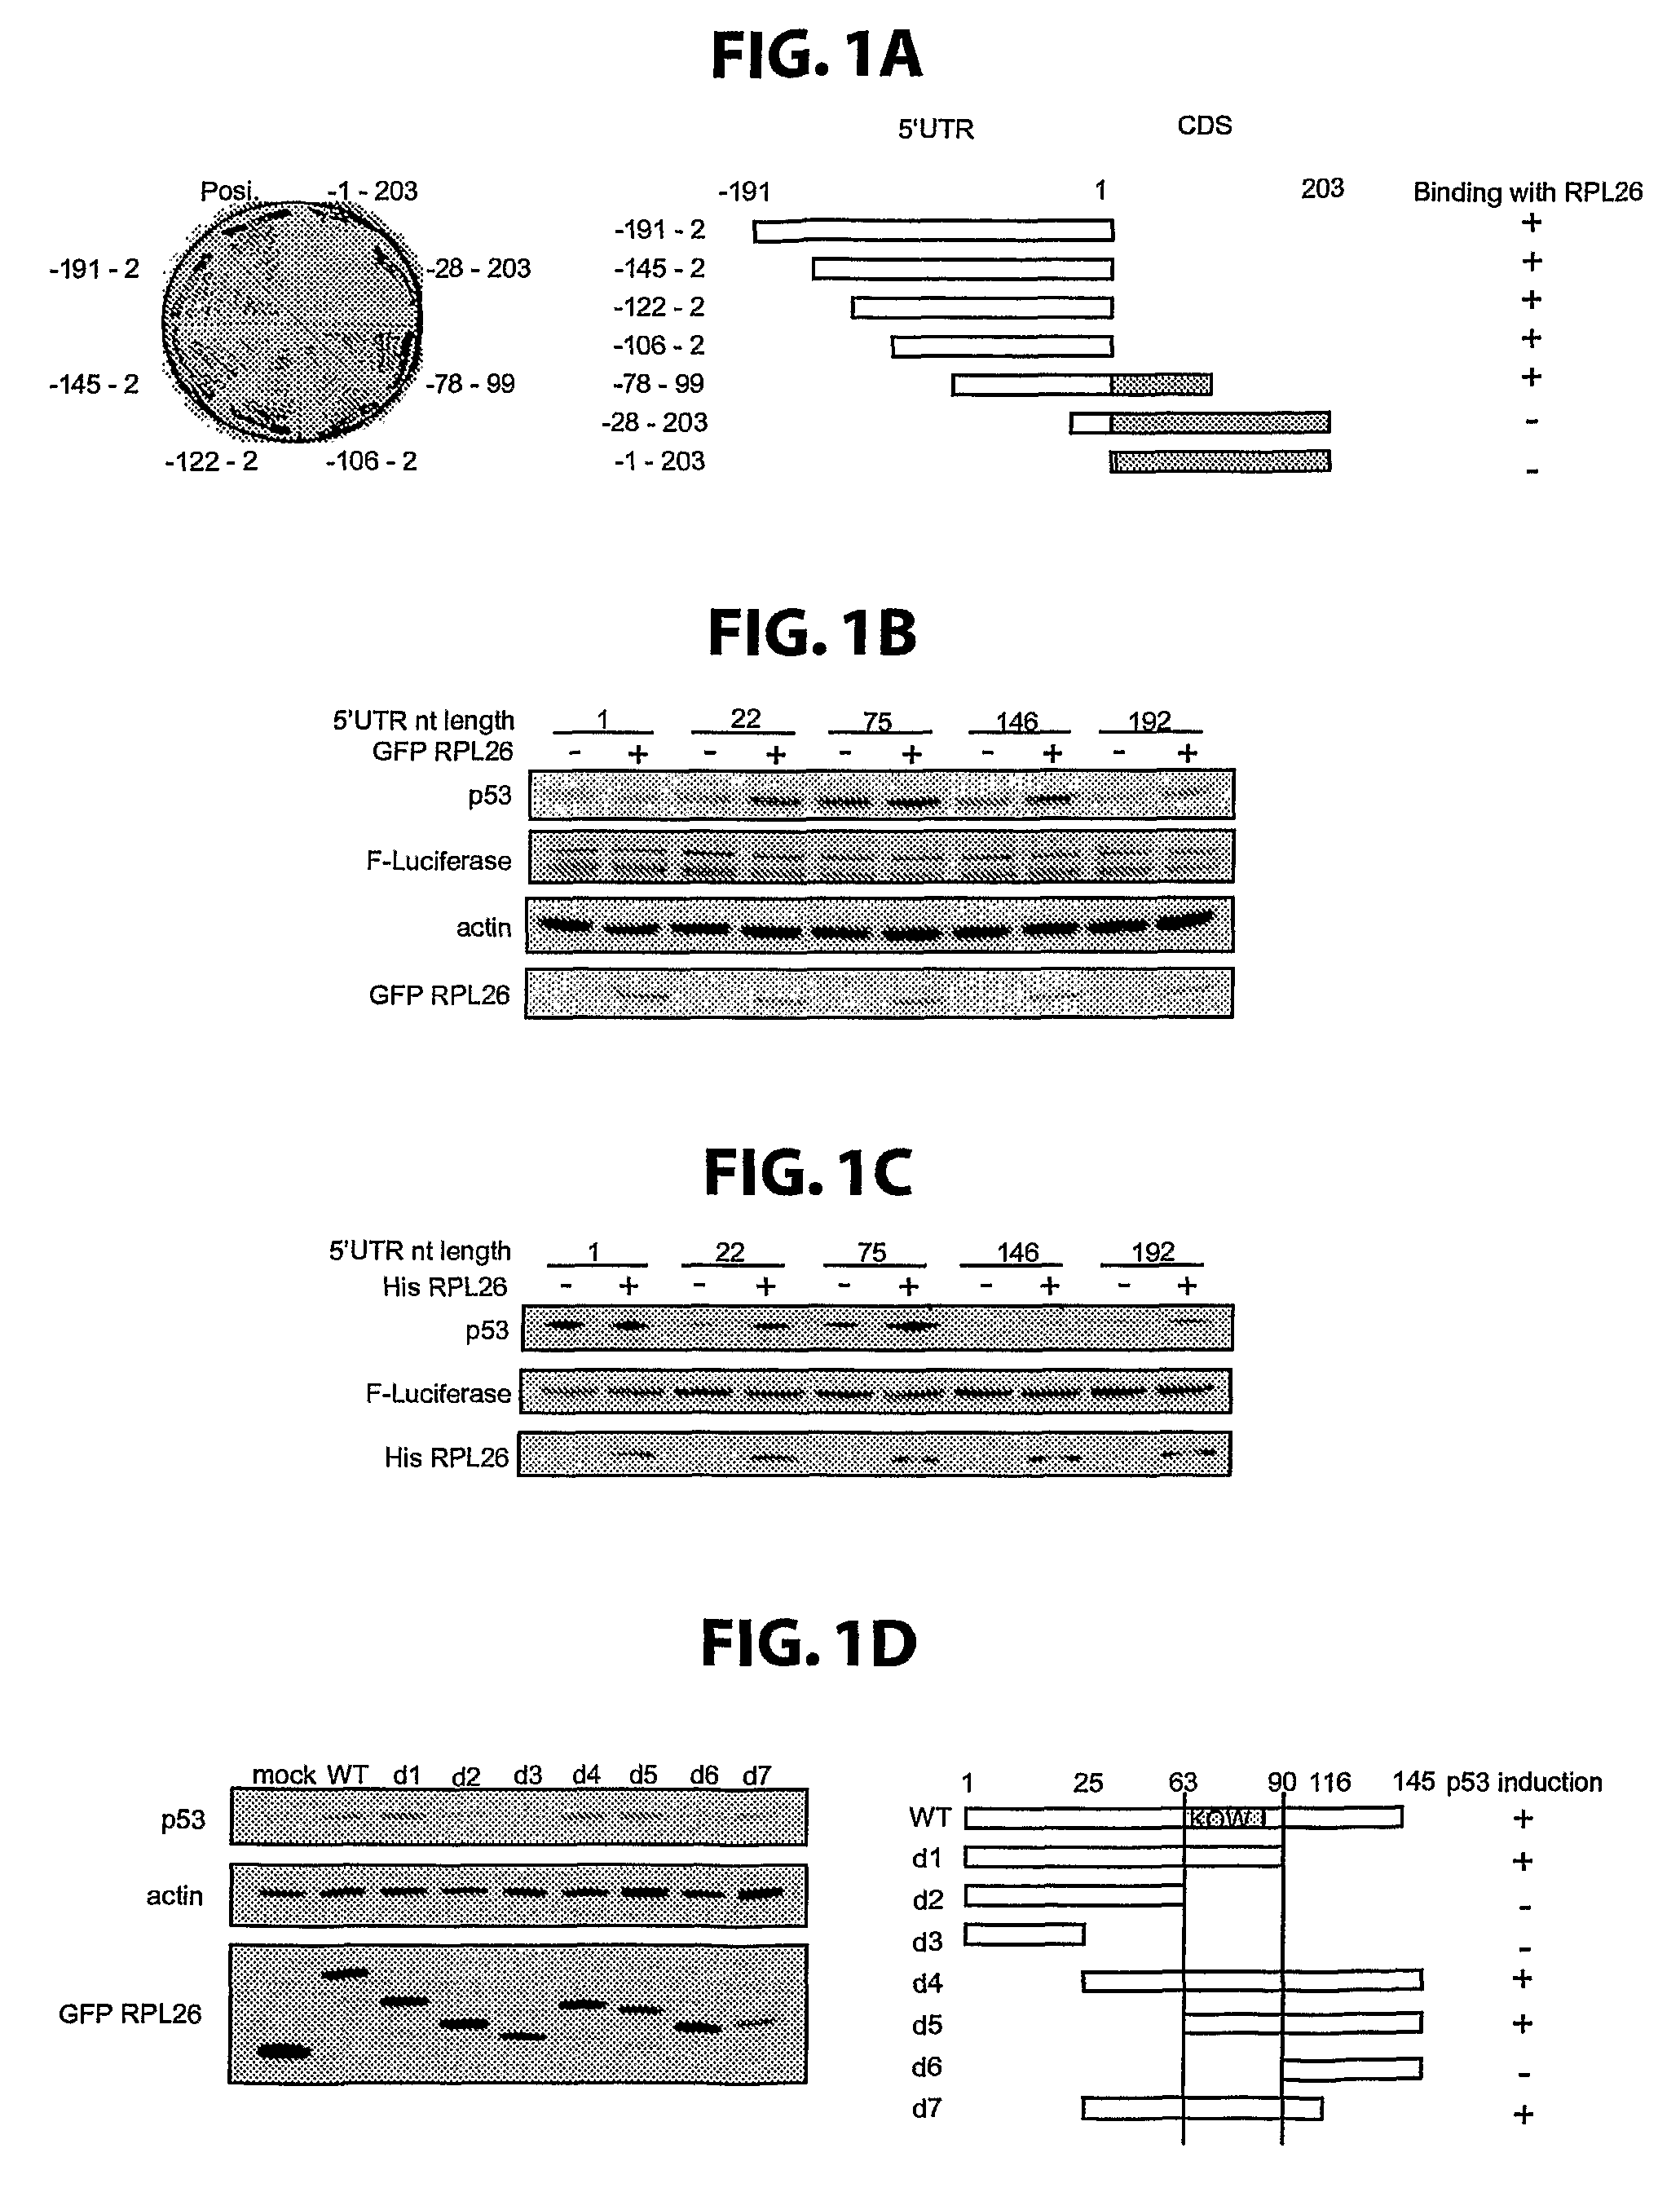 Methods for regulation of p53 translation and function